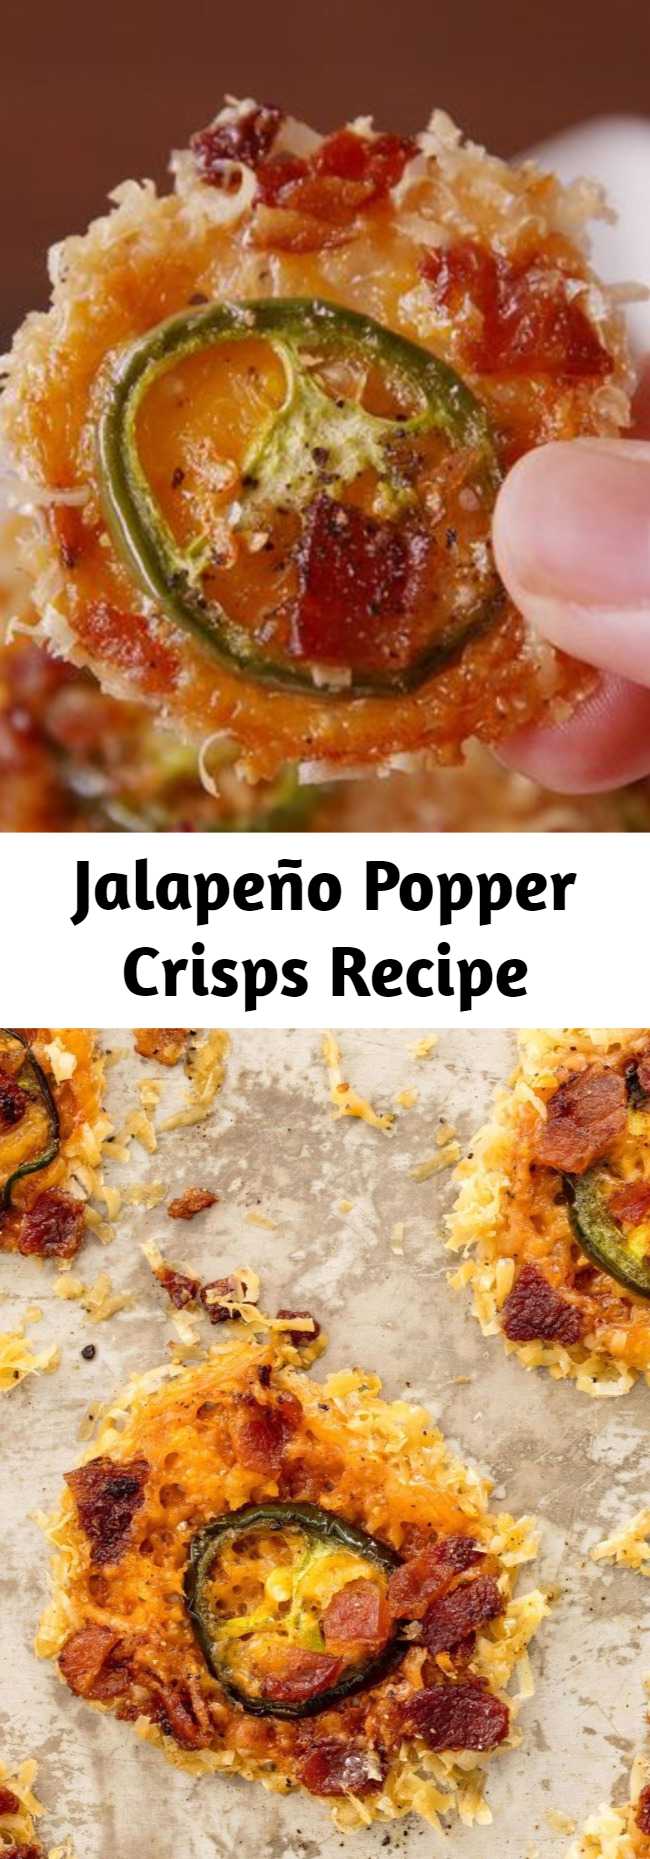 Jalapeño Popper Crisps Recipe - Gluten free · Our three favorite flavors: spicy, cheesy, and... bacon-y. #jalapeno #easy #recipe #popper #lowcarb #healthy #jalapenopopper #cheese #bacon #glutenfree